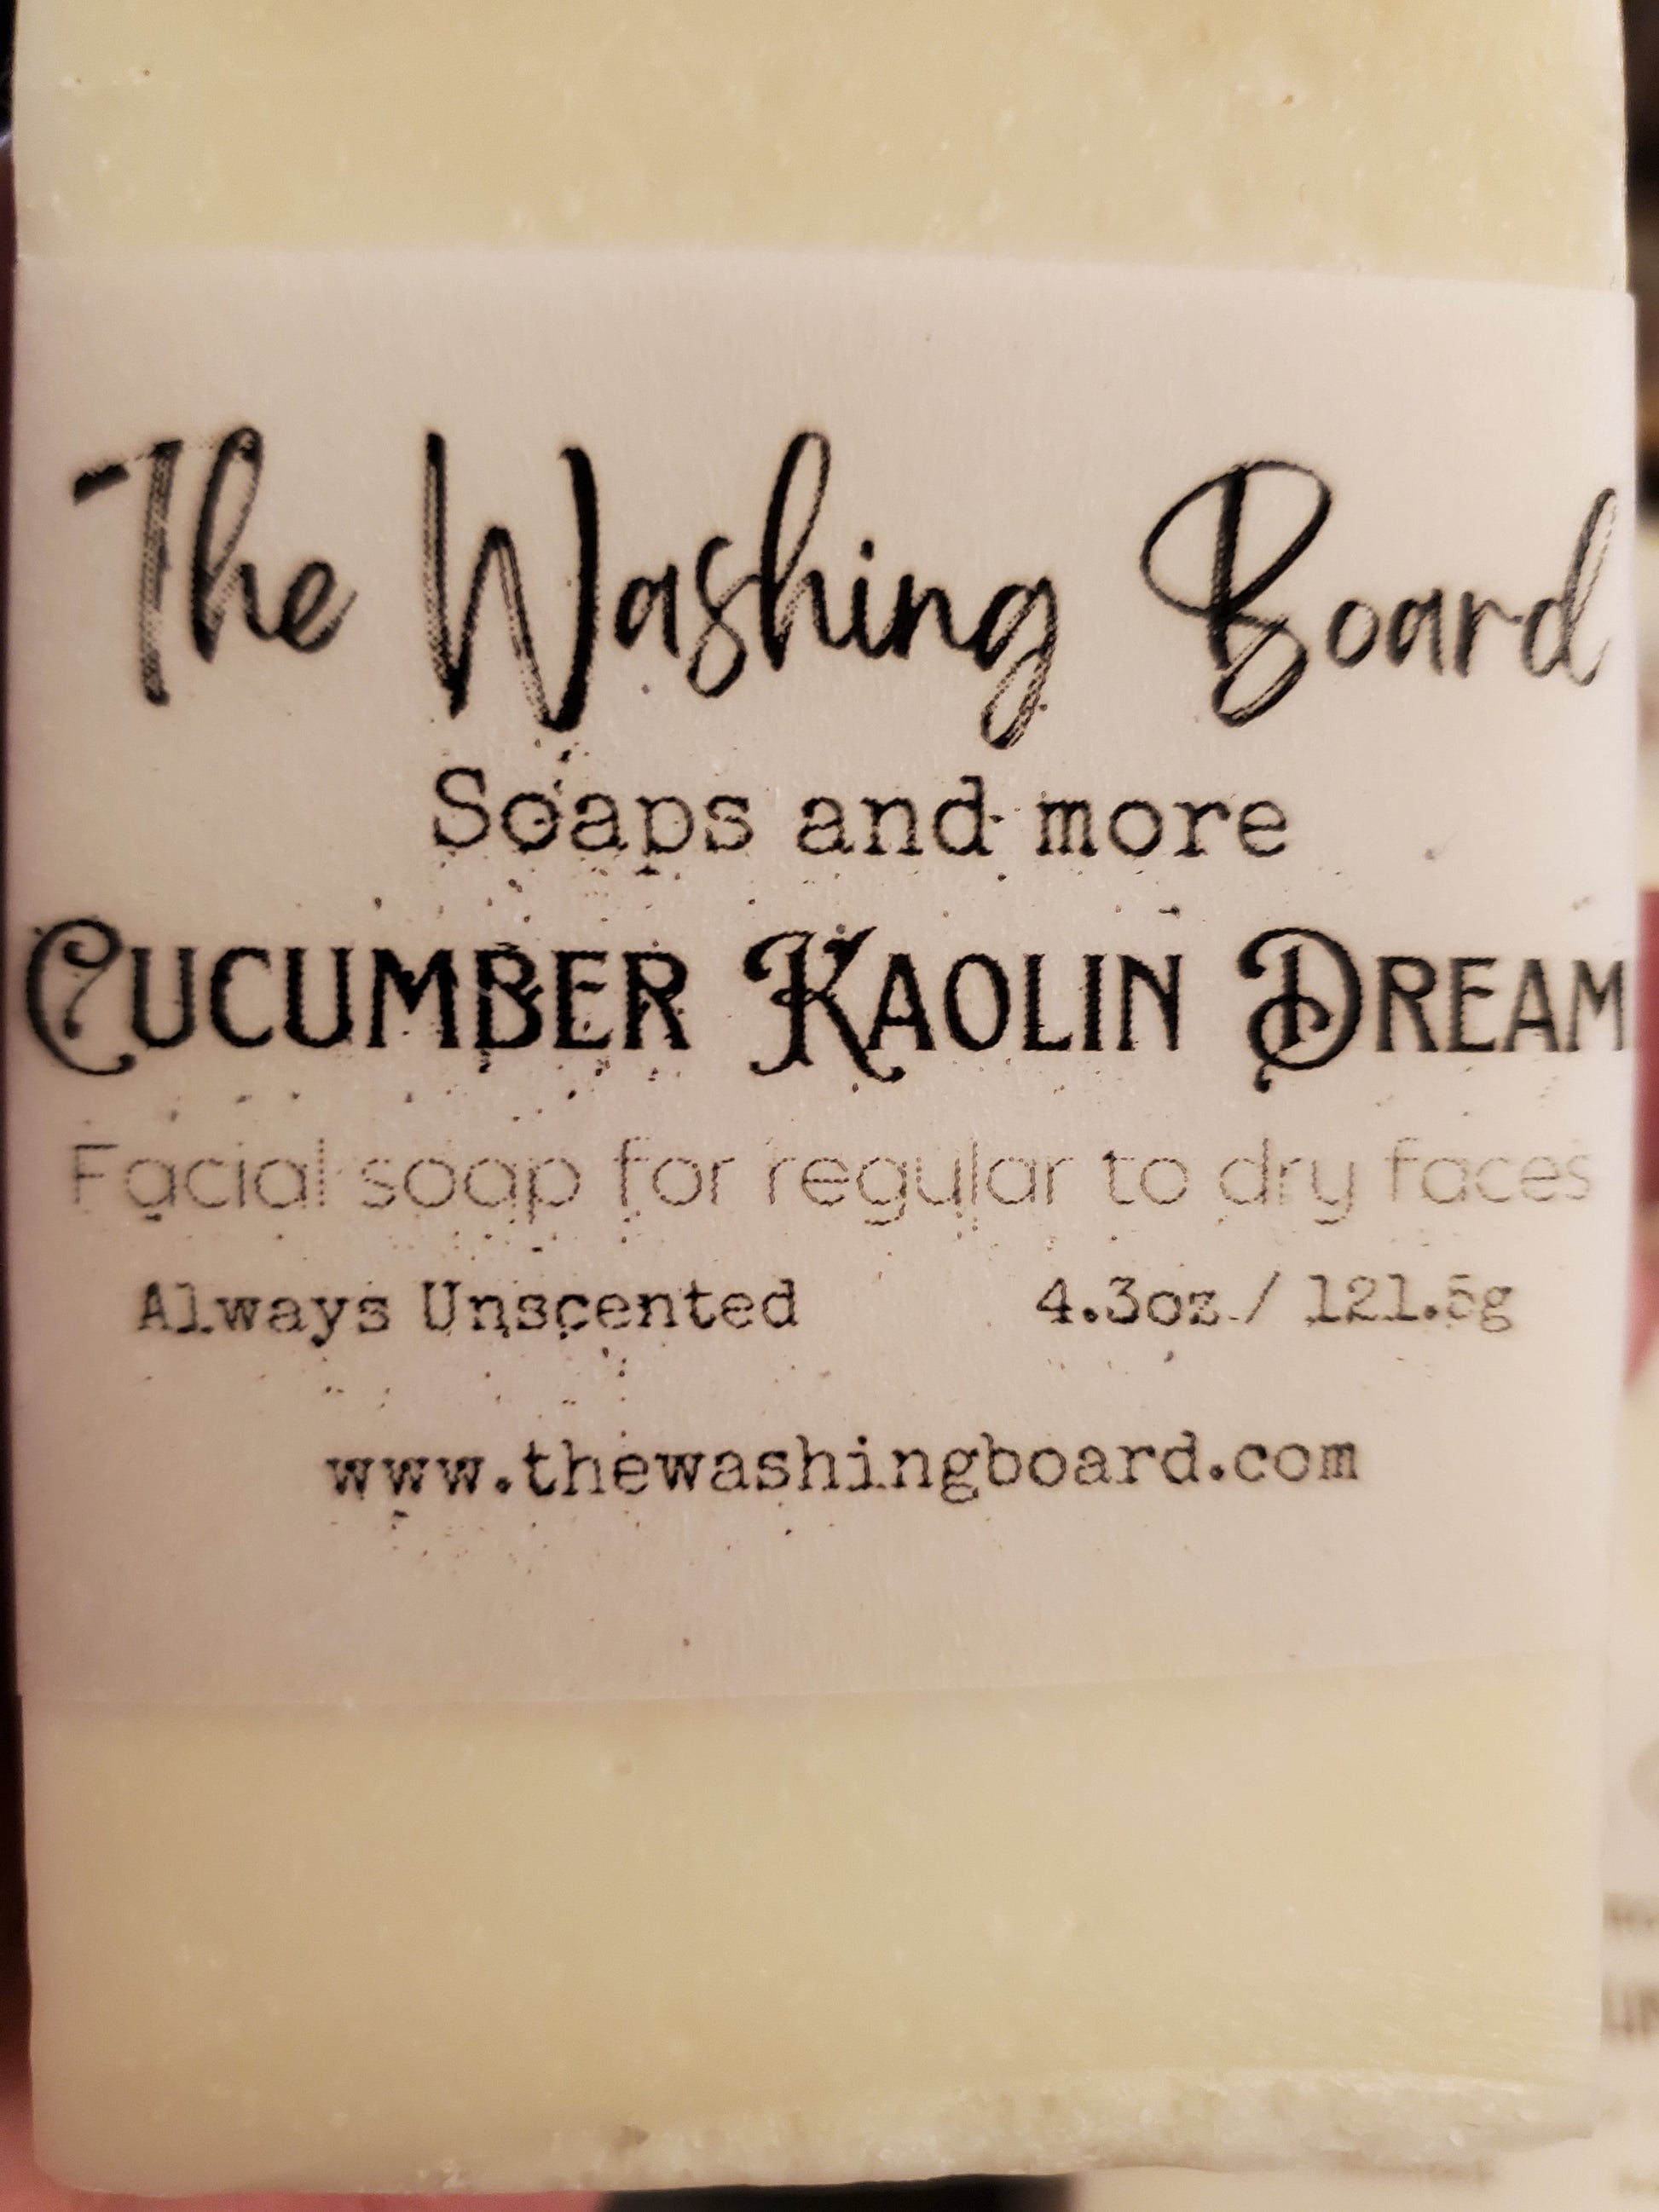 Cucumber Kaolin Dream front label and soap